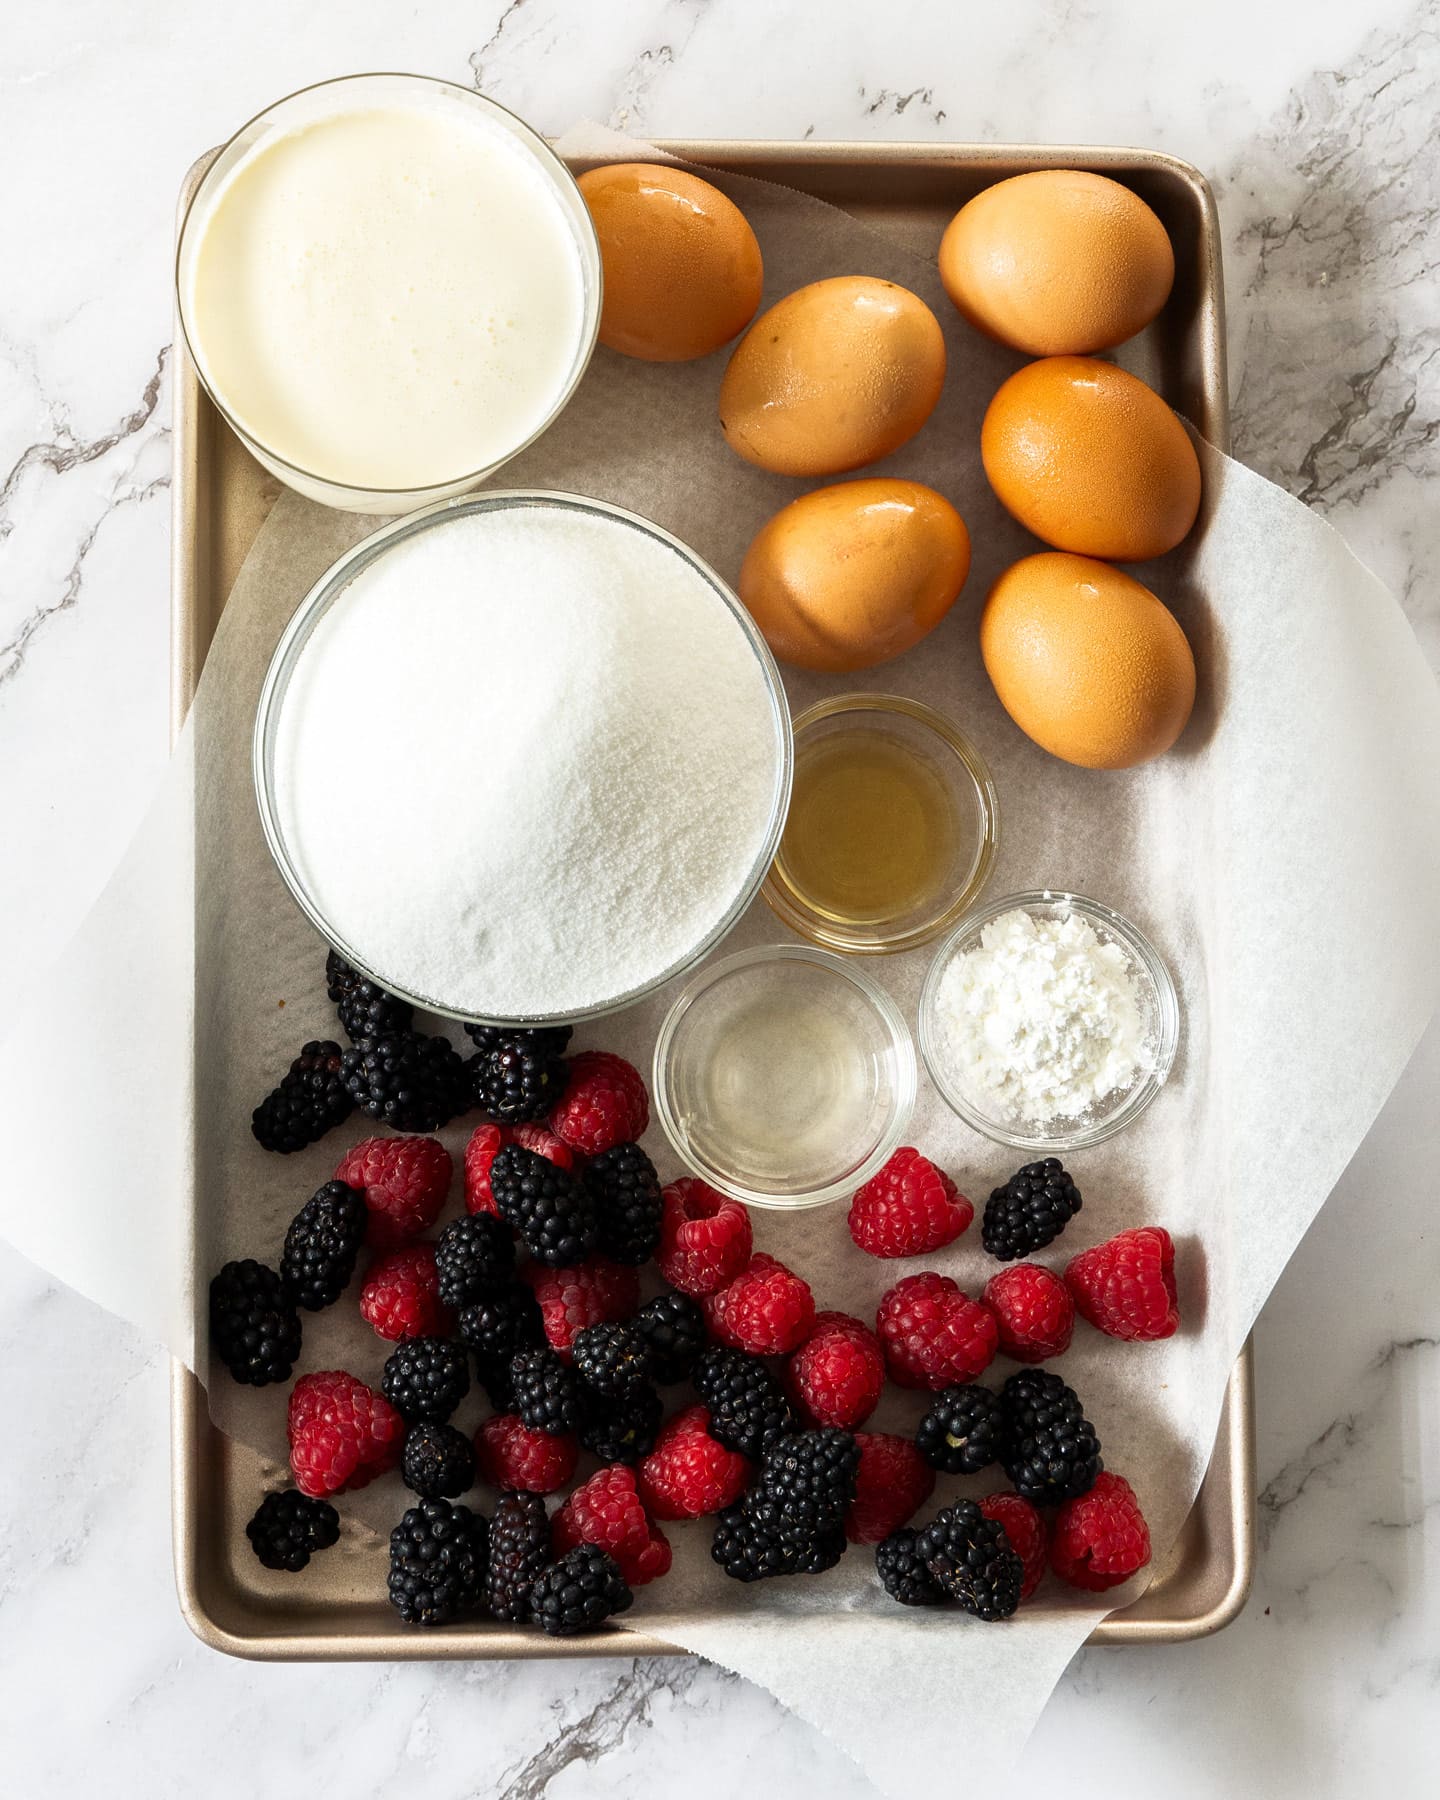 The ingredients for pavlova wreath on a baking tray.